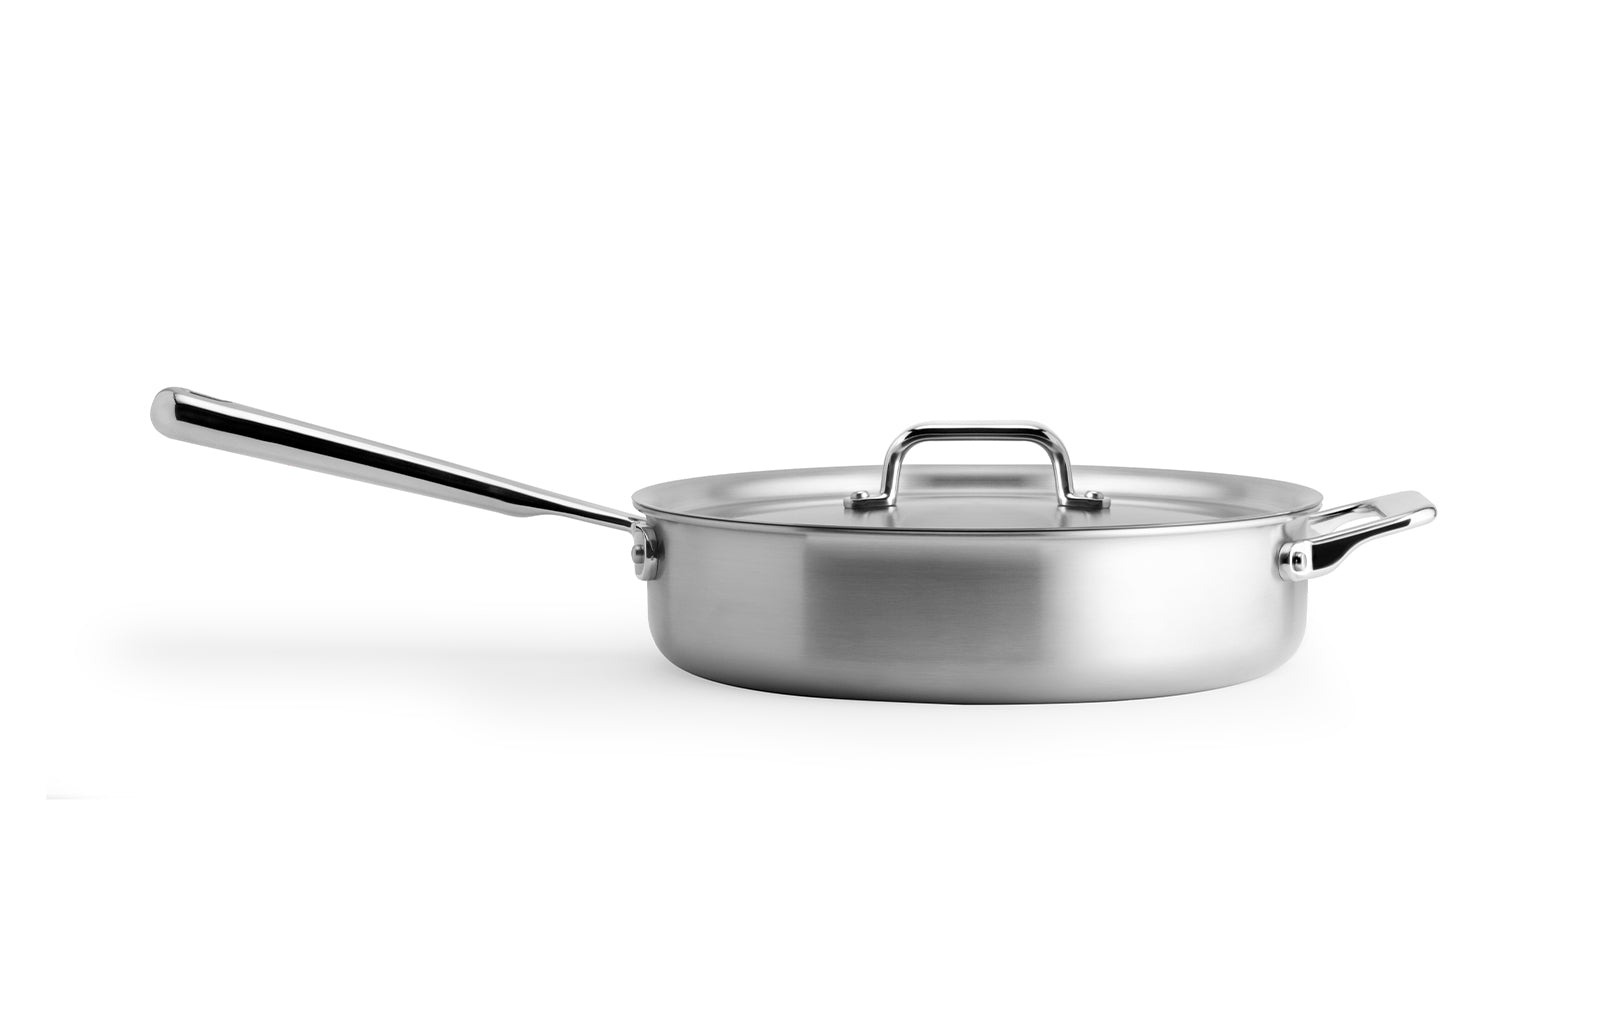 The Misen 3 QT Saute pan is the ideal combination of heat retention and fast, even heating for quicker boiling.